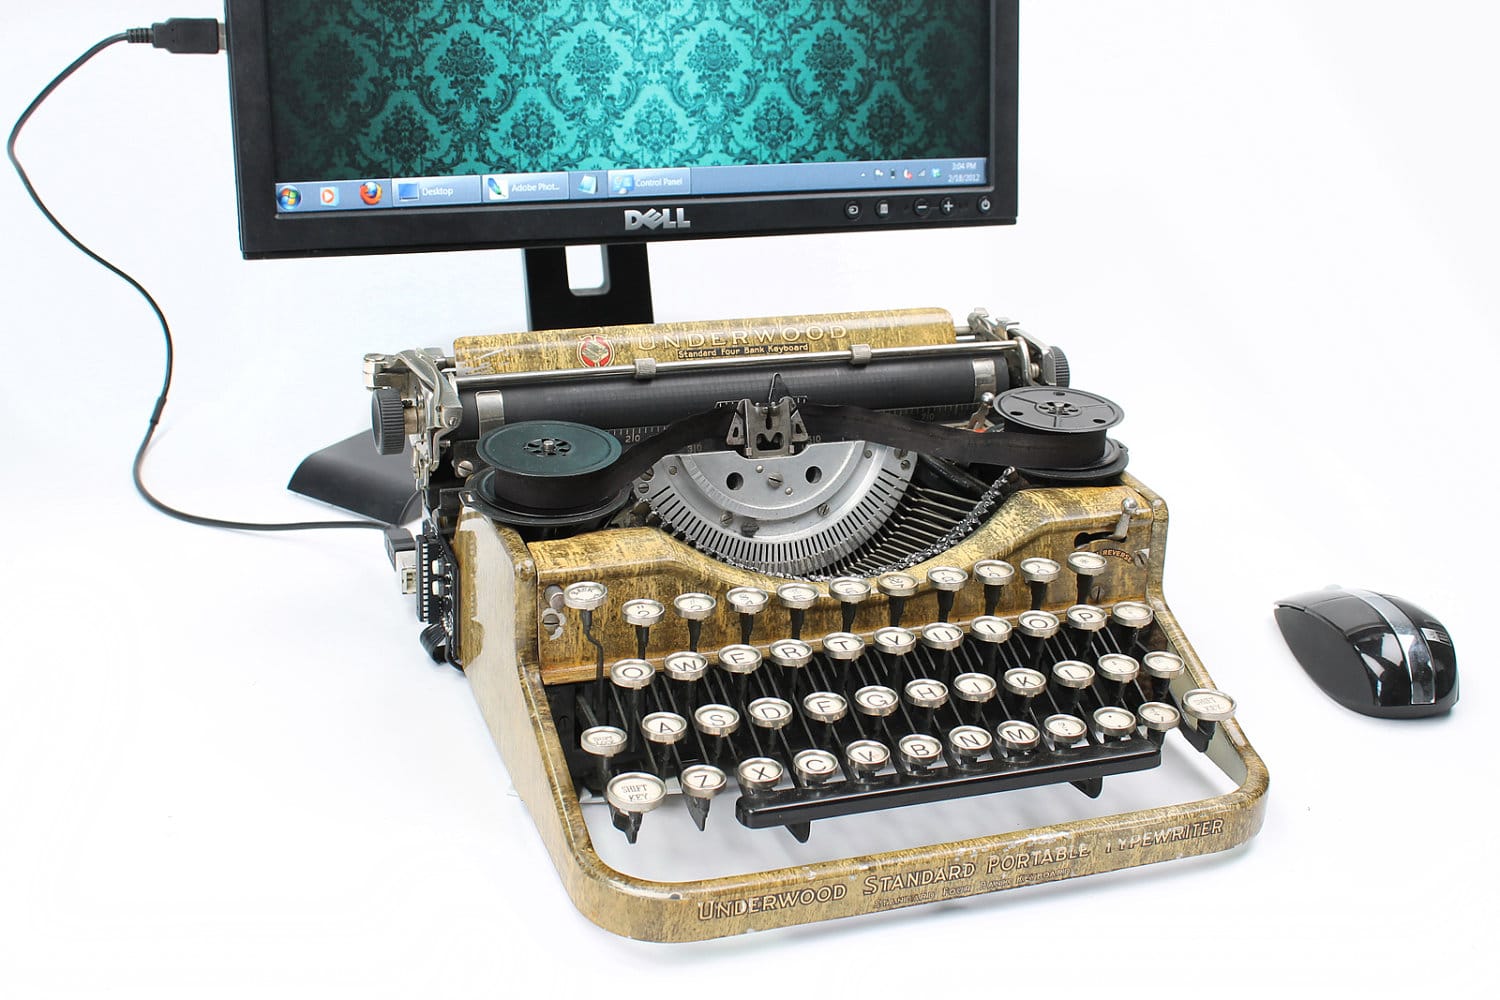 Real Typewriters Become Retro USB Keyboards